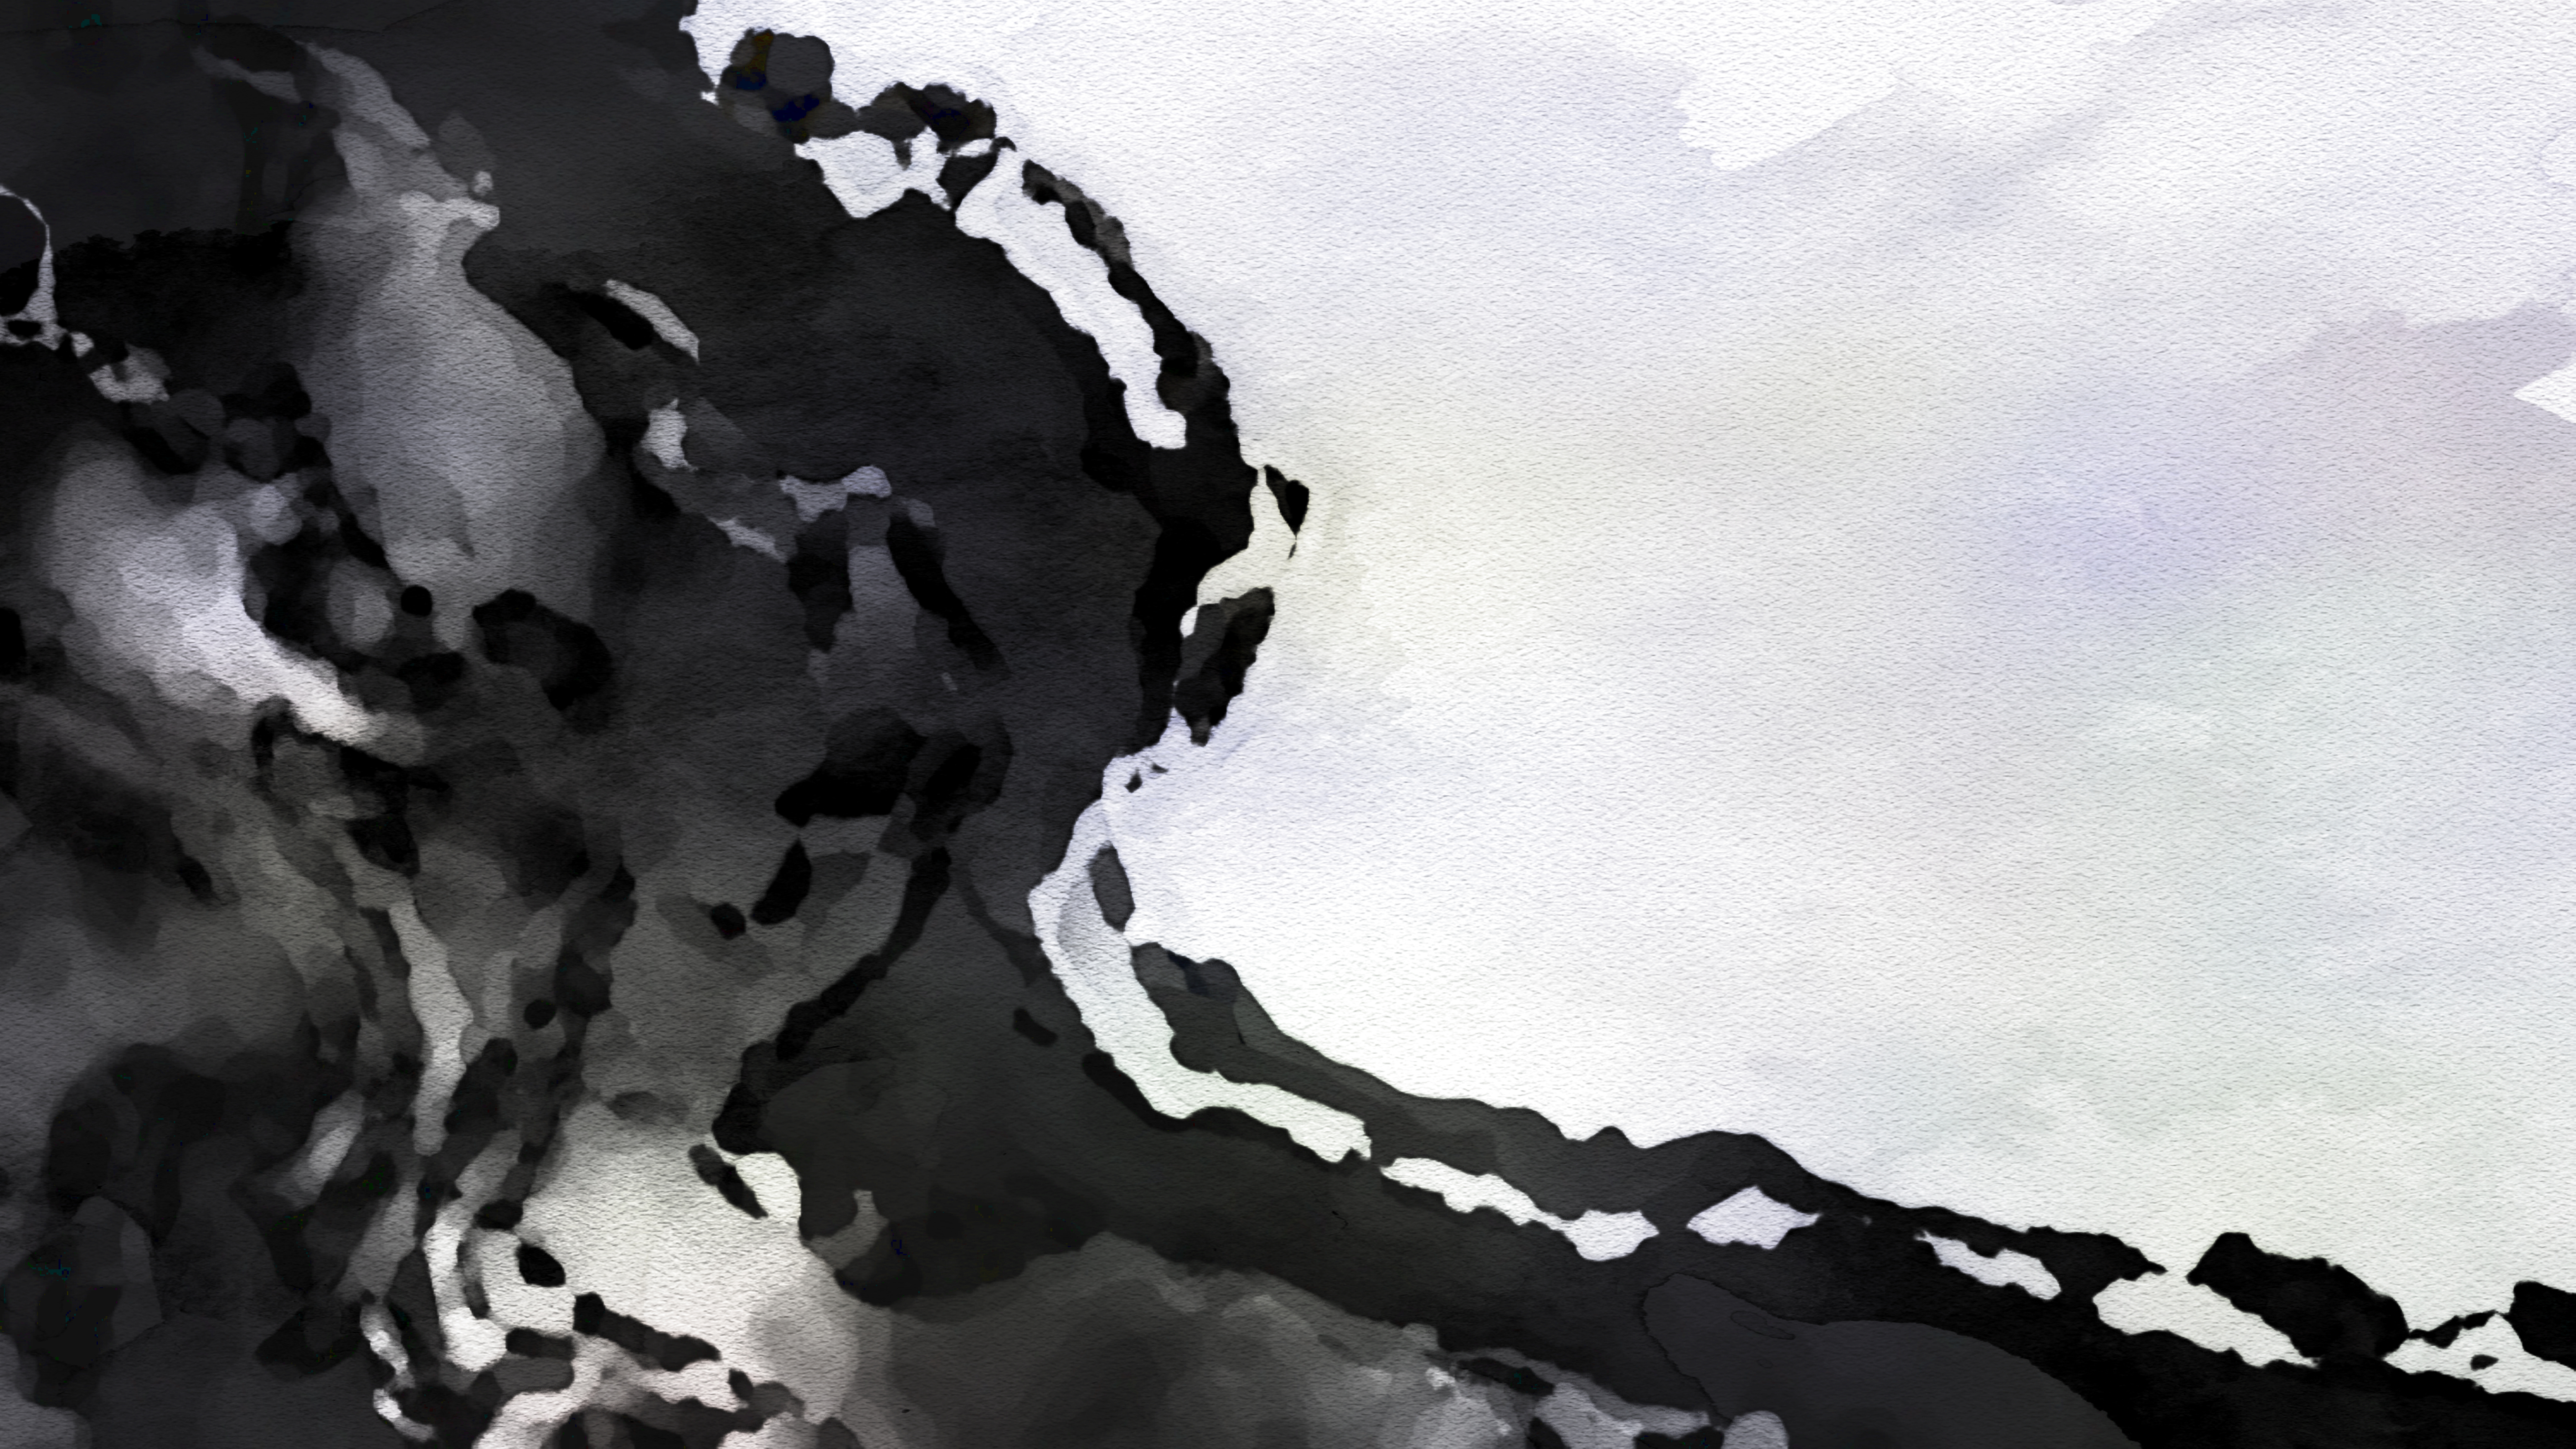 Free Black and White Grunge Watercolour Texture Background Image